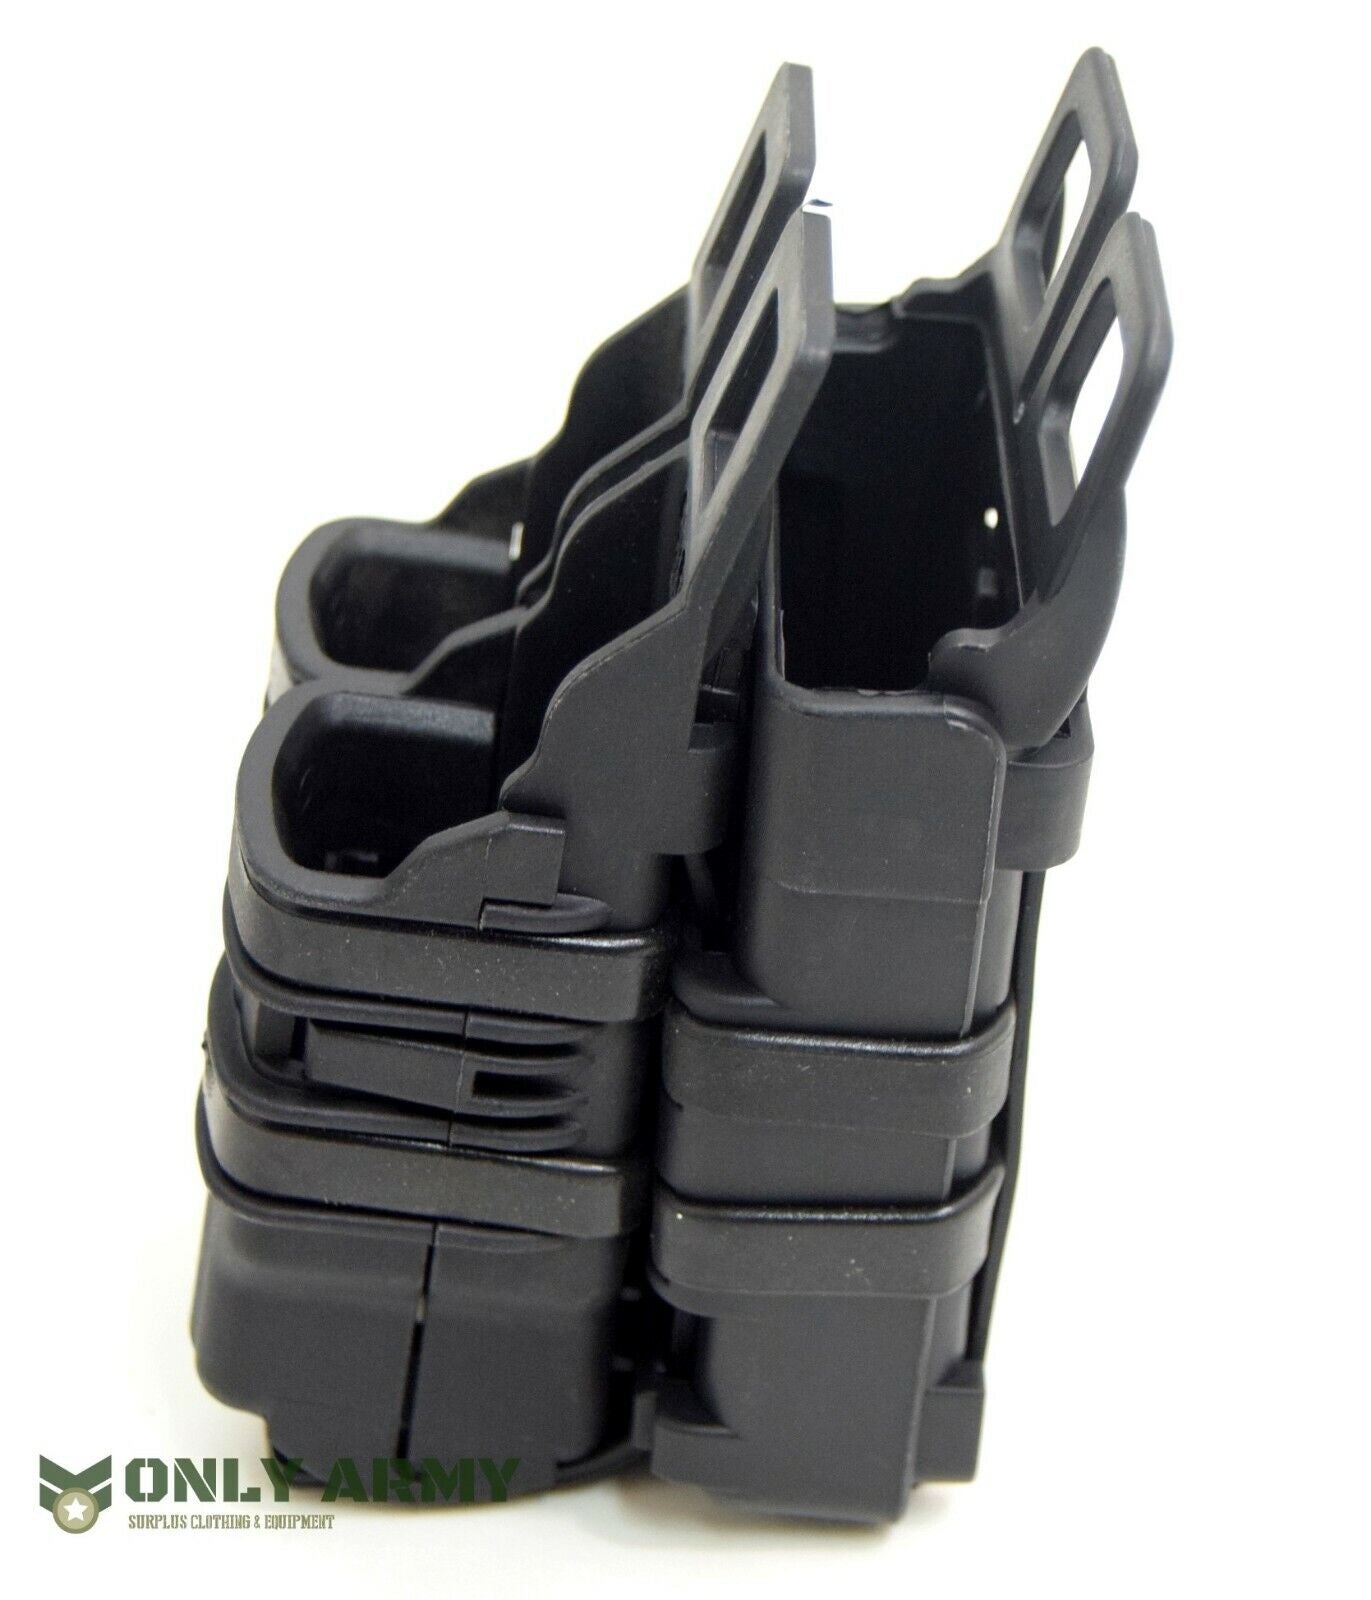 Black Fast Mag Pistol / Rifle Pouch MOLLE Hard Shell Mag Holder UKSF Army Style